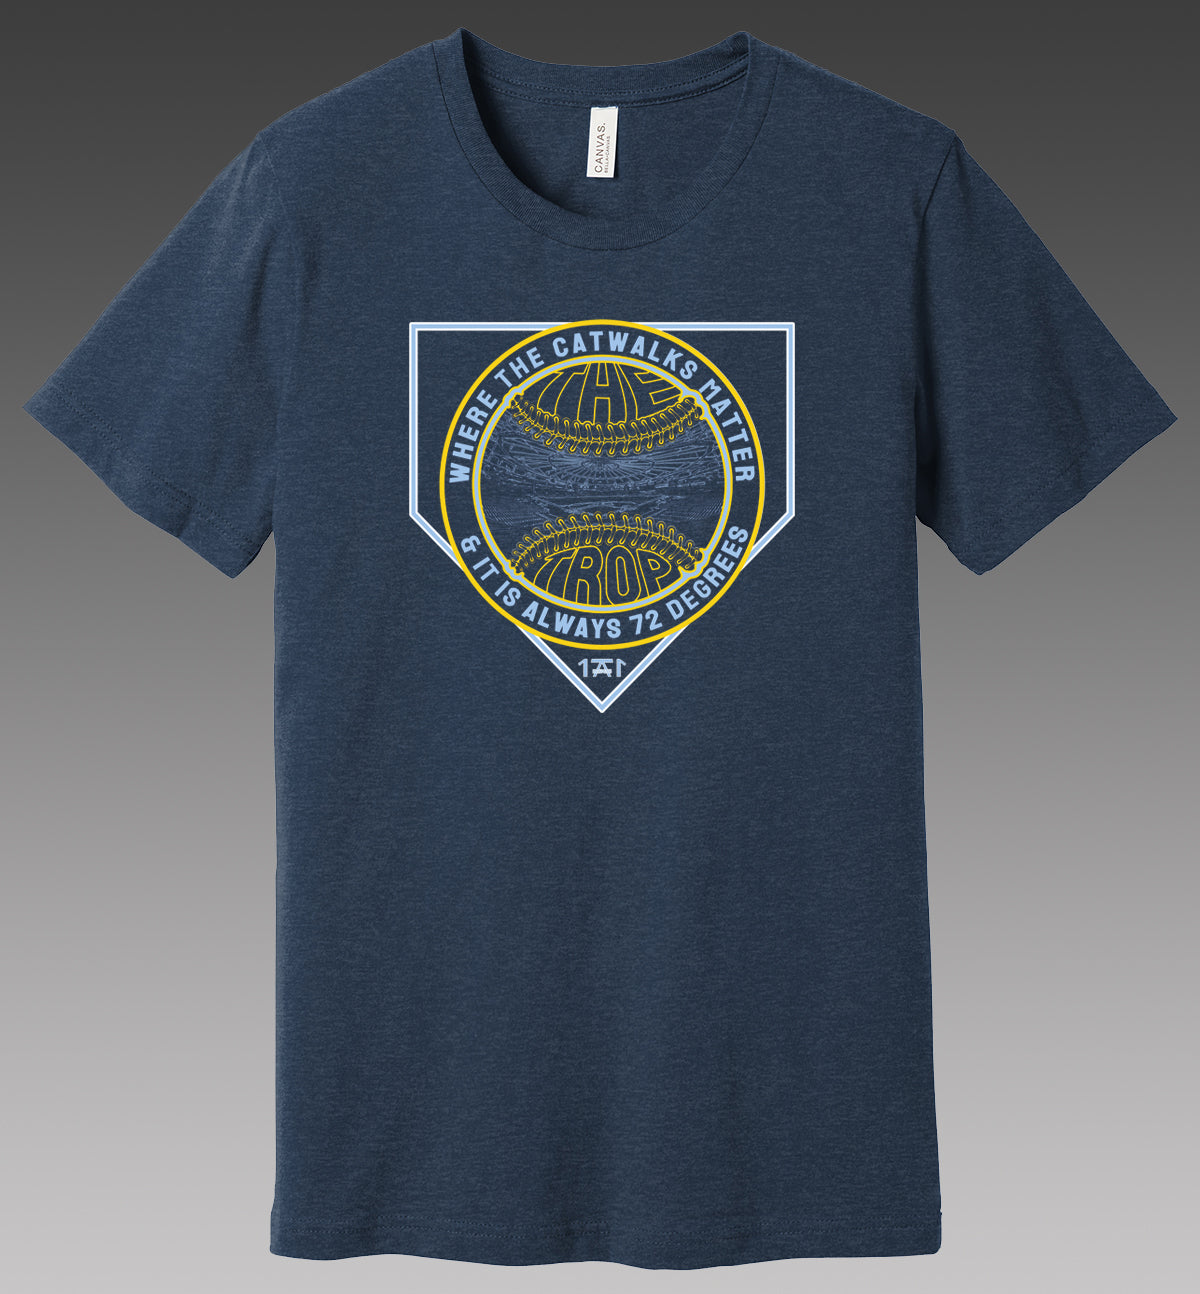 Navy blue t shirt featuring the inside of tropicana field home of tampa bay rays featuring the quote where the catwalks matter and it is always 72 degrees